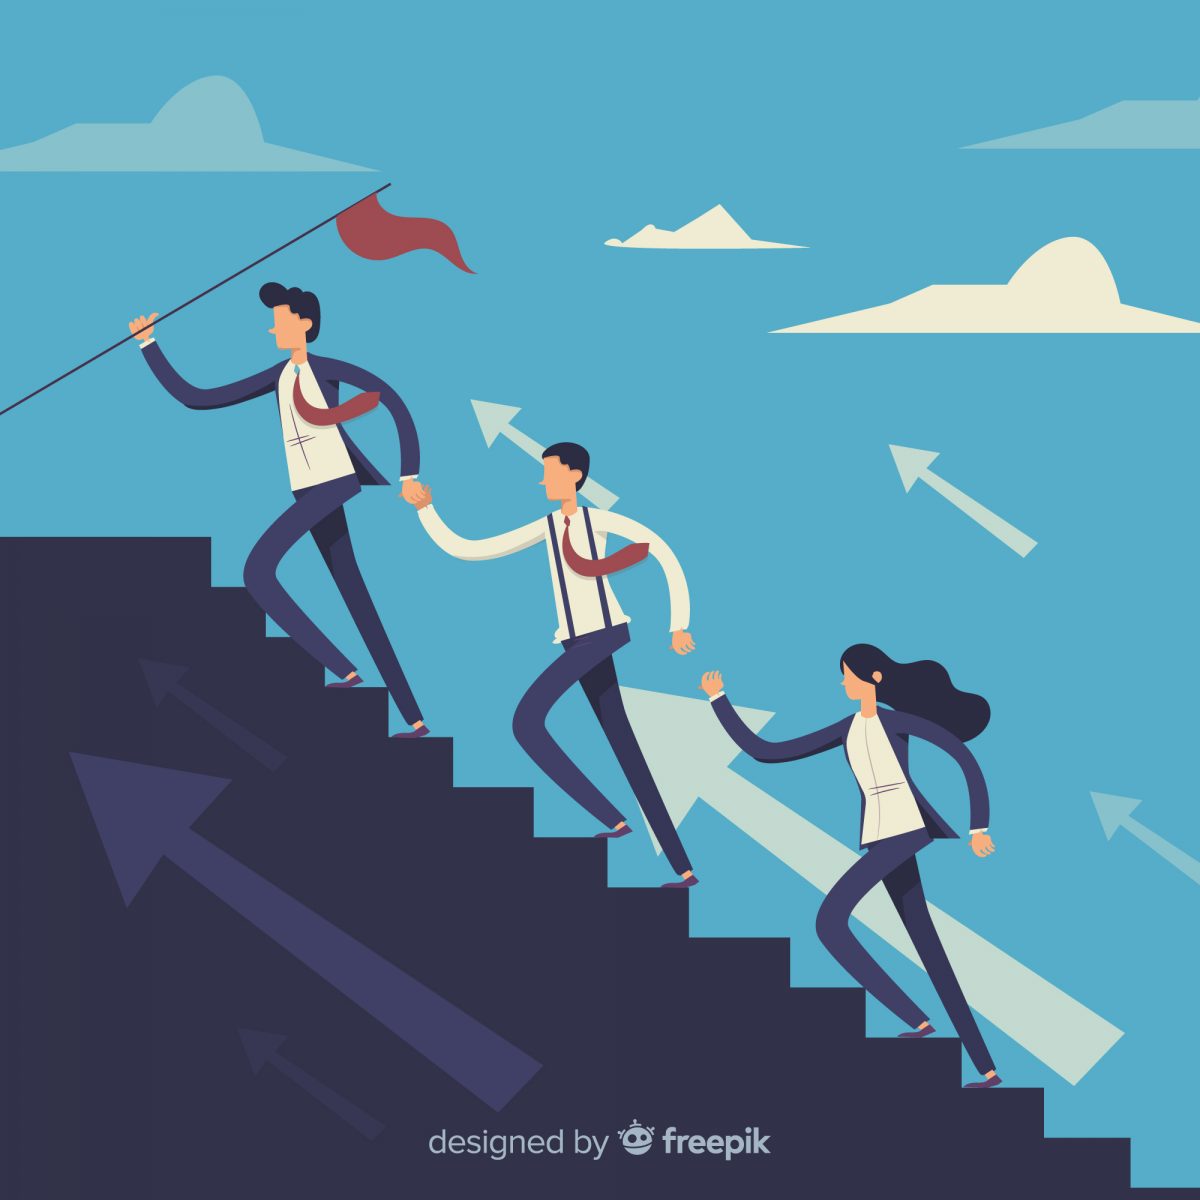 Leadership Challenges in the Workplace & How to Overcome Them